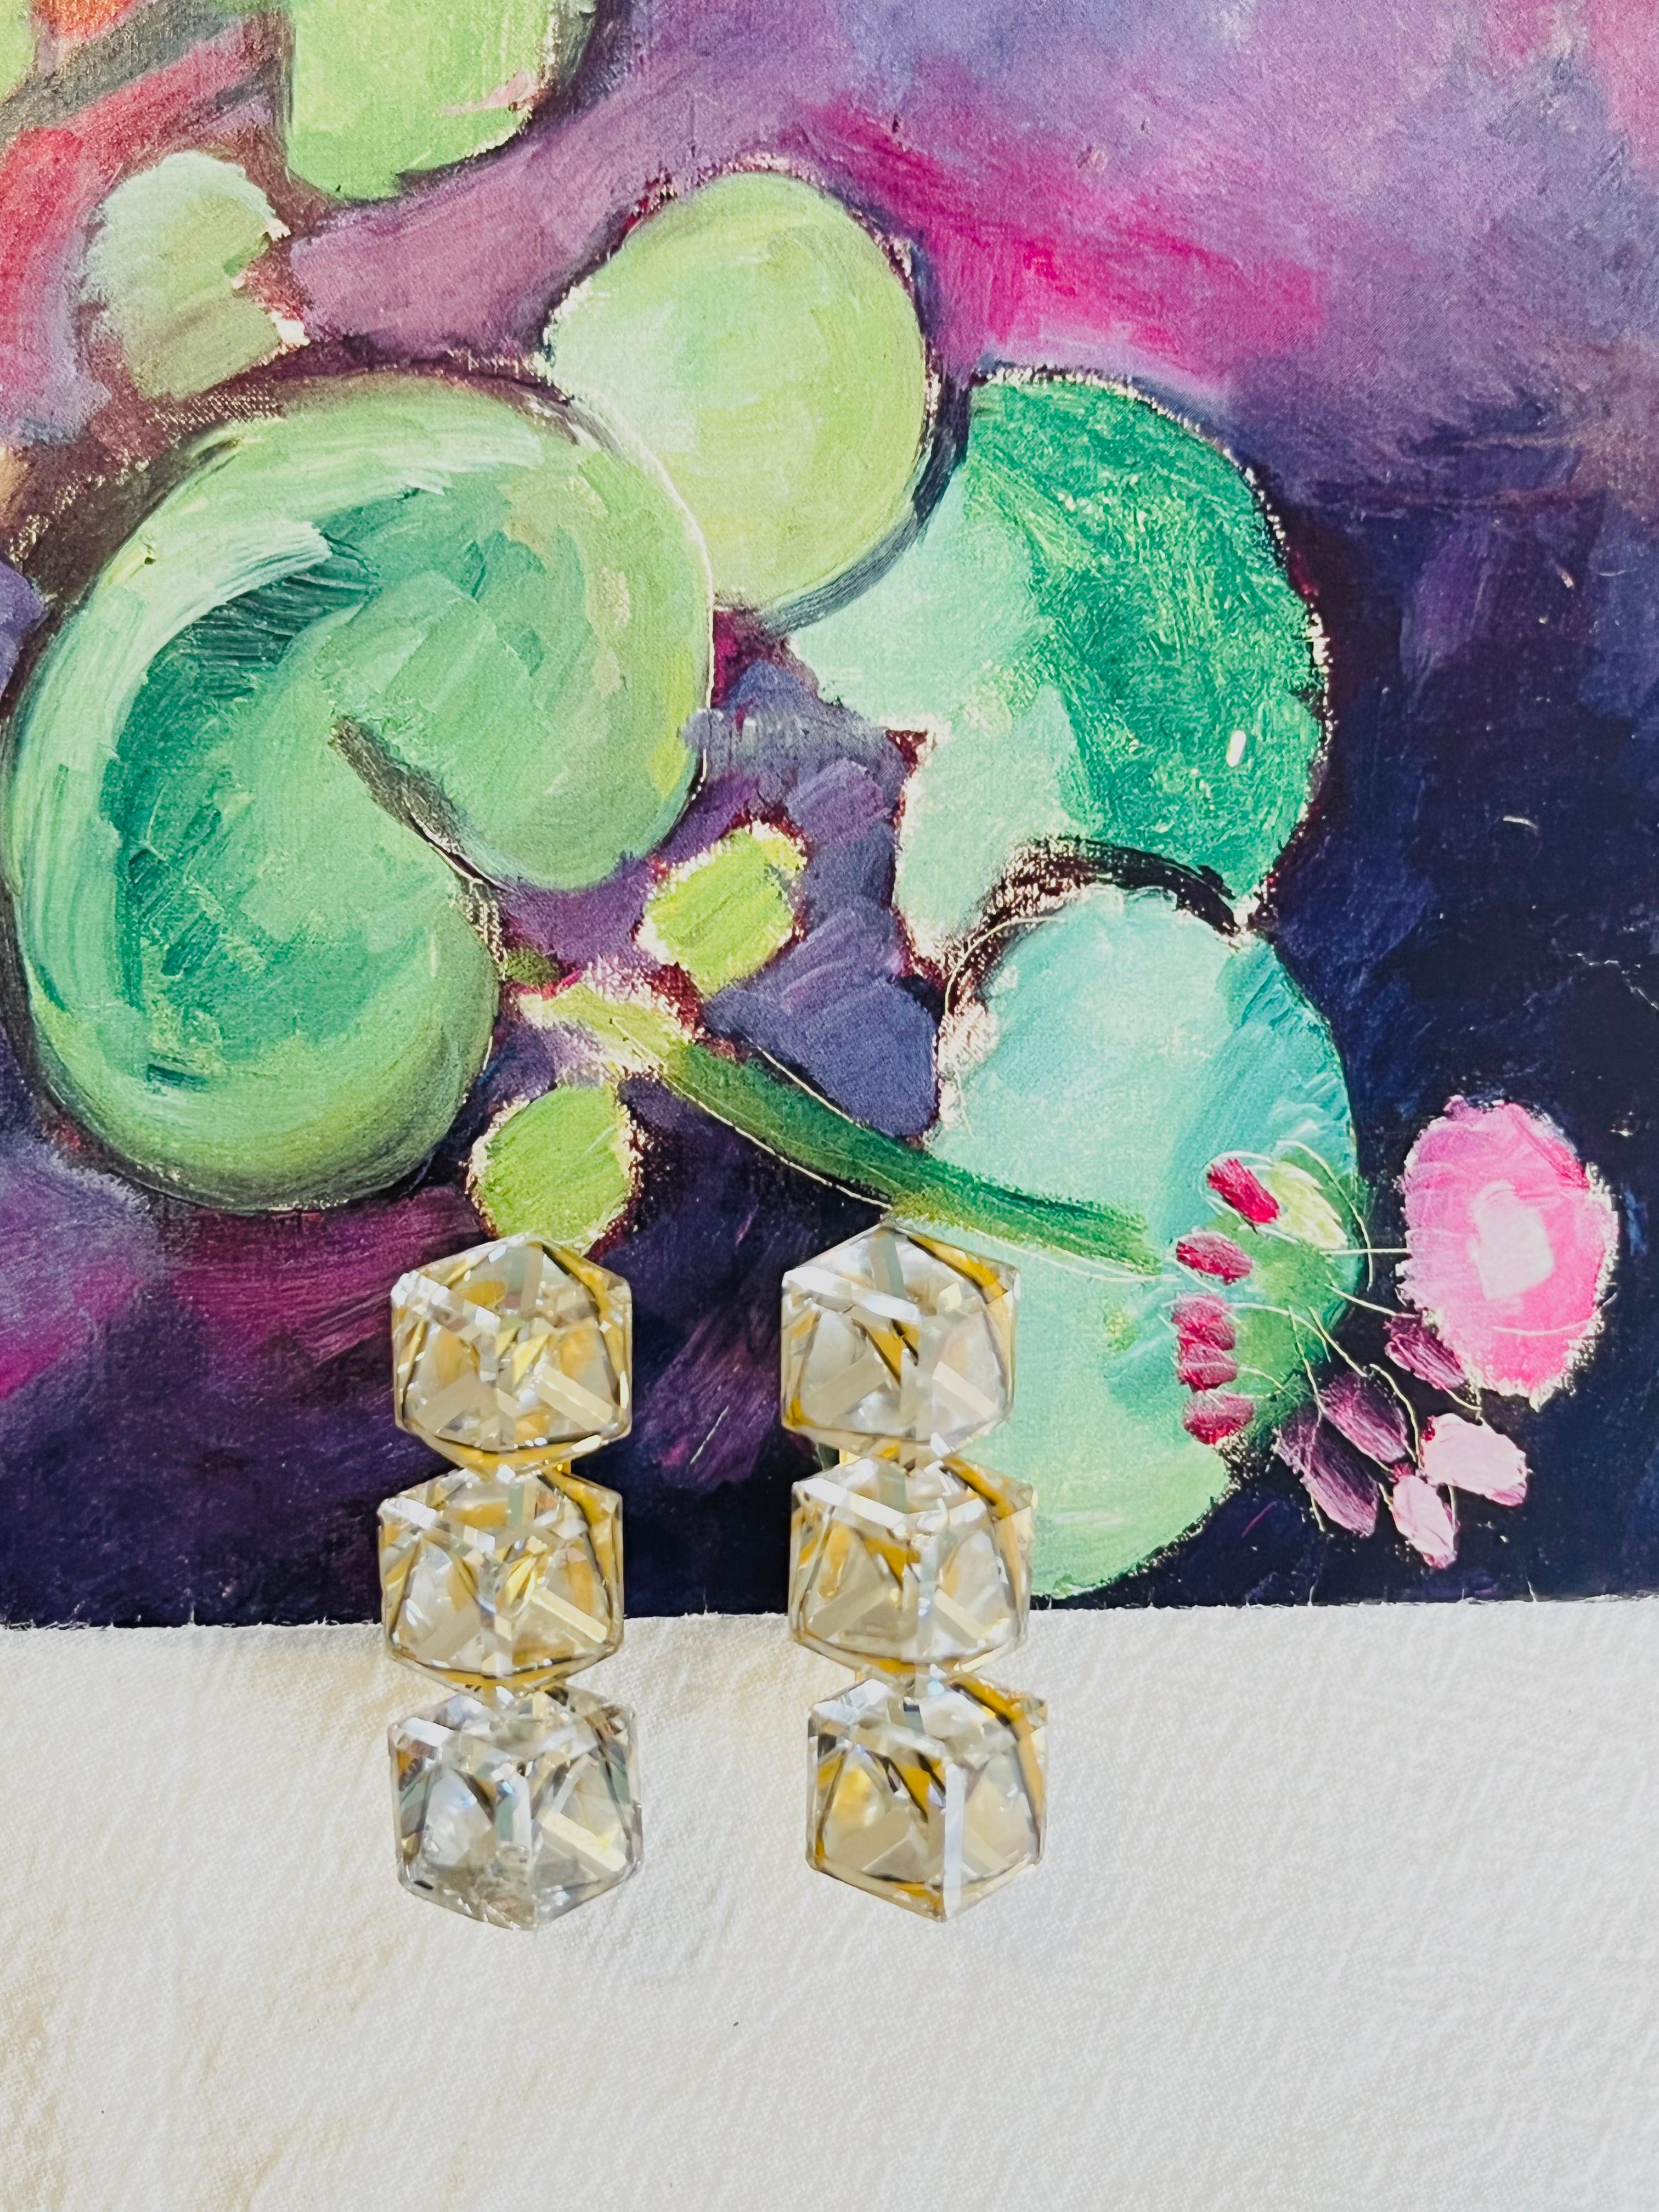 Yves Saint Laurent YSL Vintage 1960s Trio Clear Crystal Cube Long Shining Clip Earrings, Gold Tone

Good condition, chips at each earrings, barely noticeable when wearing.

Vintage and very rare to find. 100% Genuine. Signed at the rear.

Size: